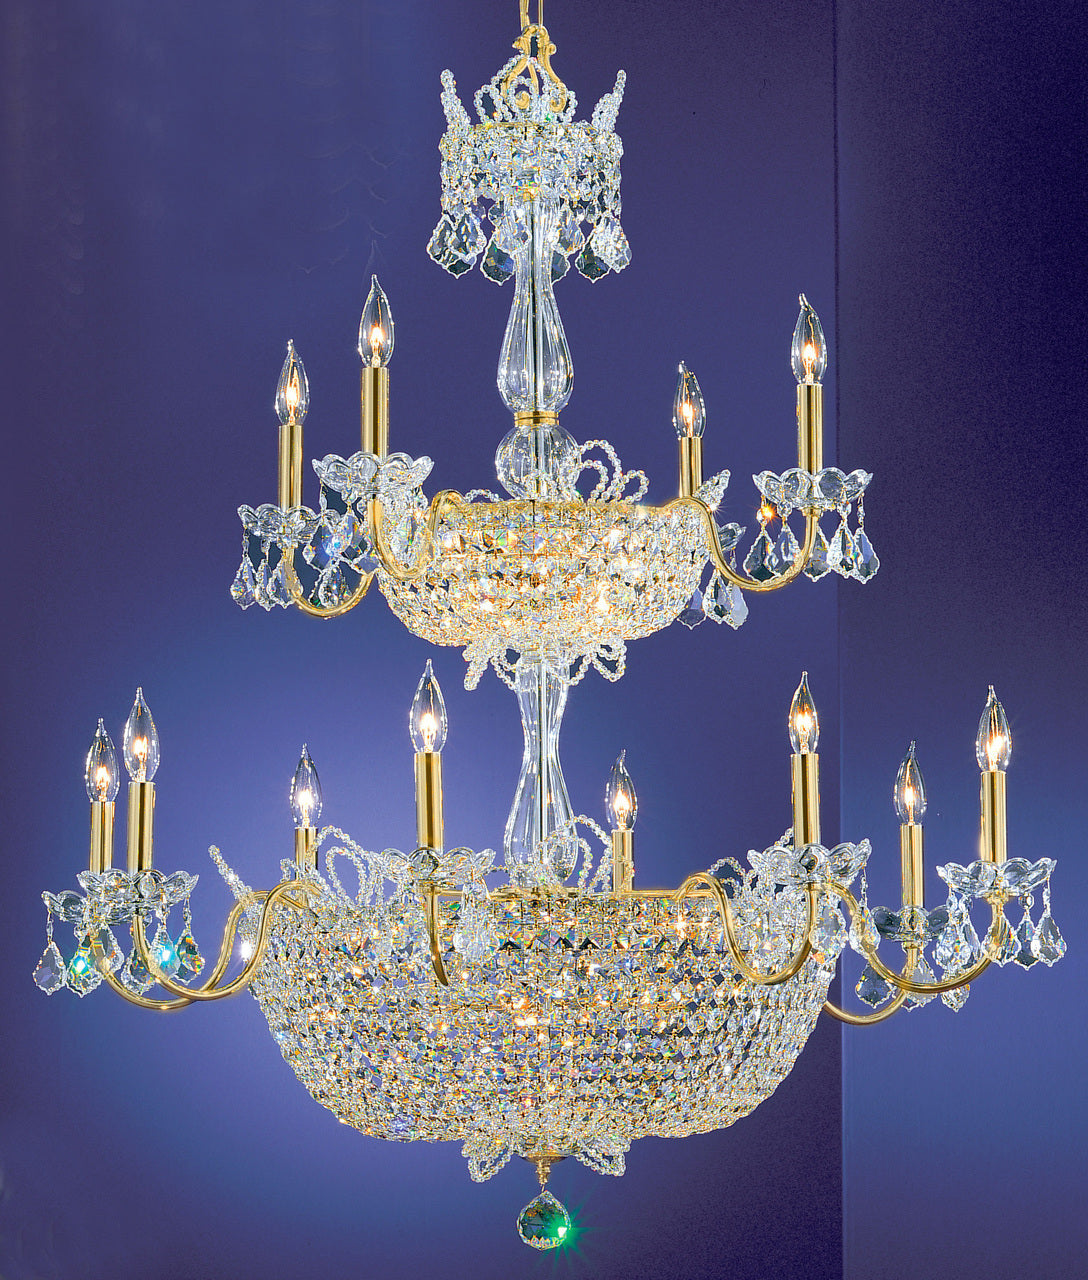 Classic Lighting 69789 GP S Crown Jewels Crystal Chandelier in Gold